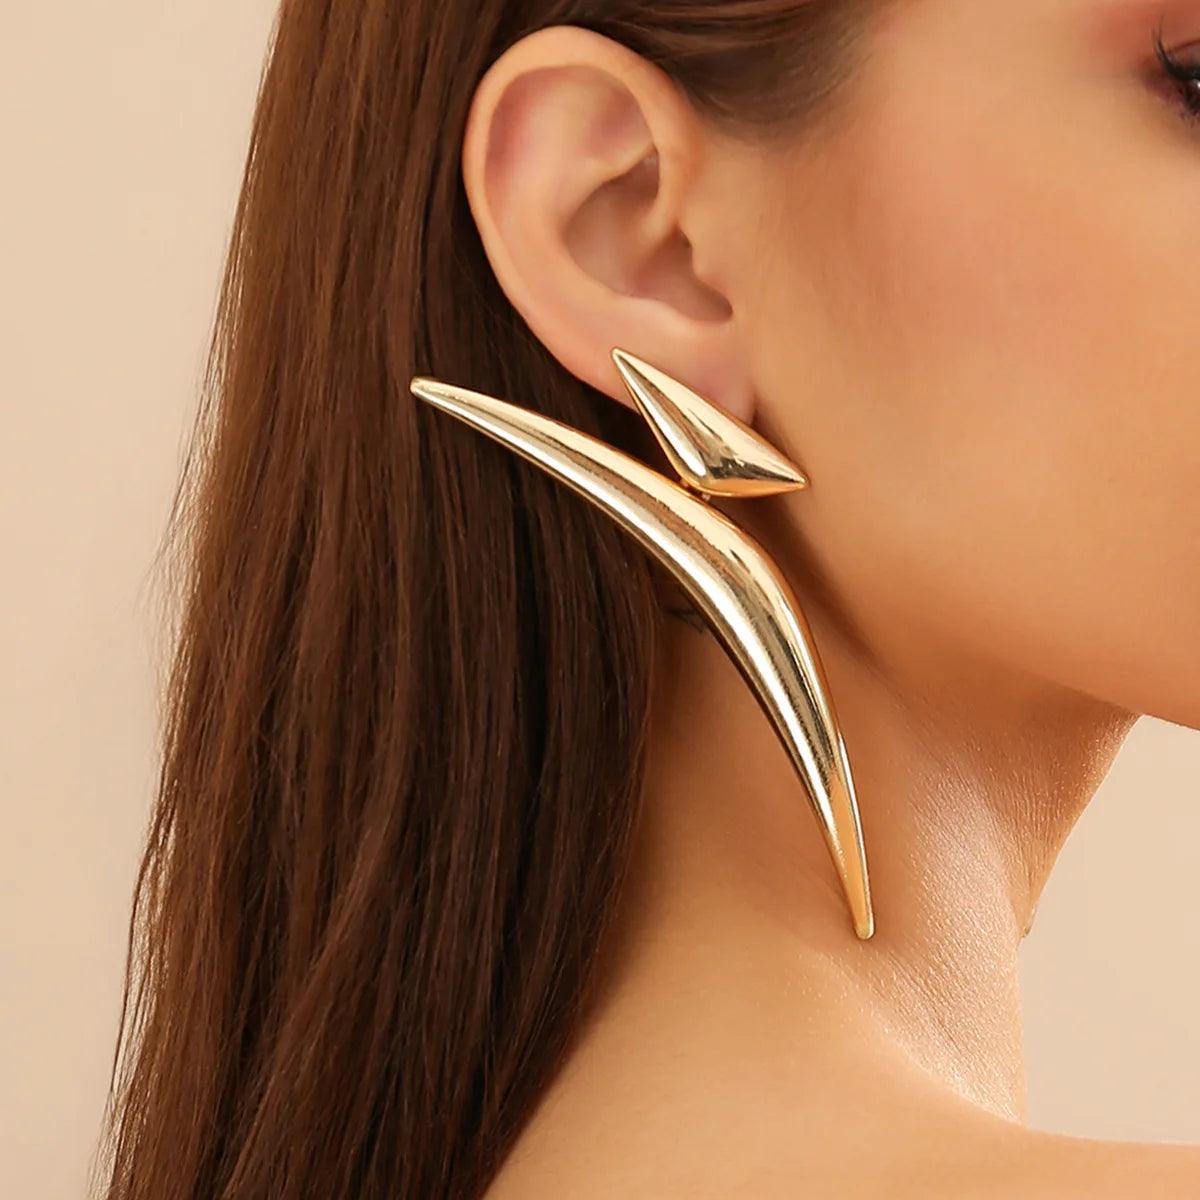 Andy Triangle Pointed Earrings - Virago Wear - Accessories, Earrings, New arrivals - Accessories